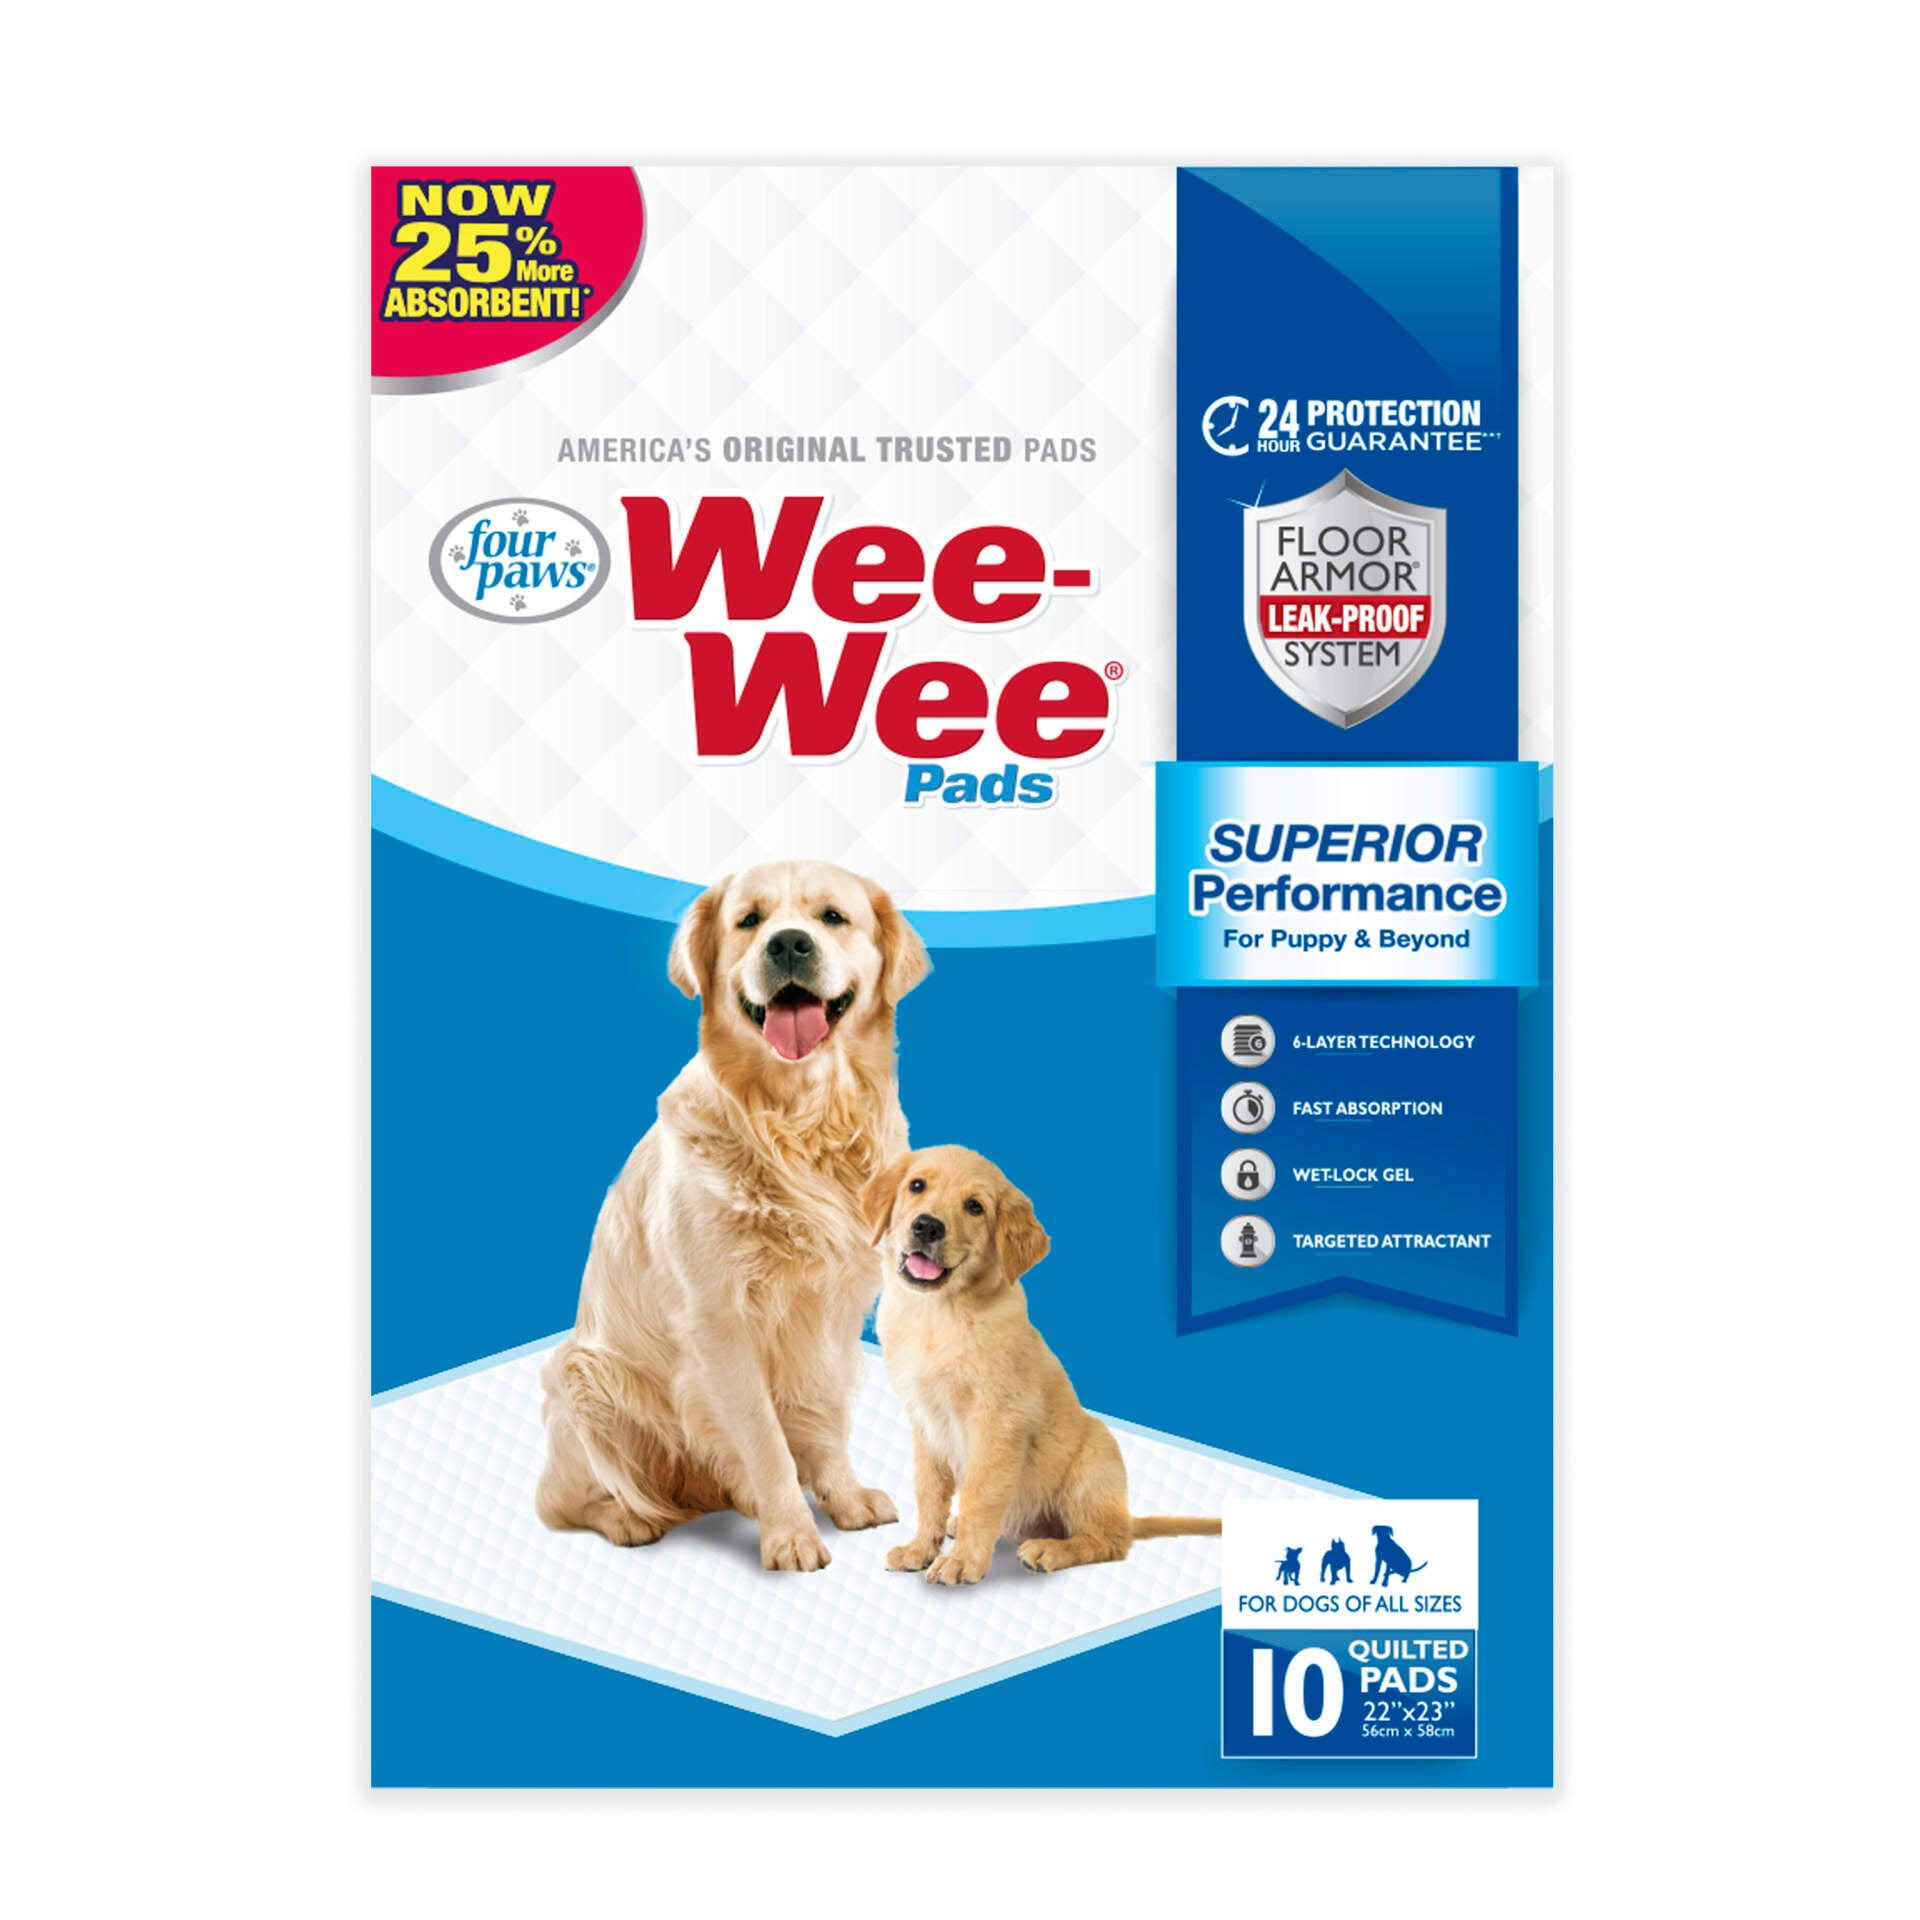 Four Paws Wee-Wee Puppy Pads - 22" x 23", 10pcs